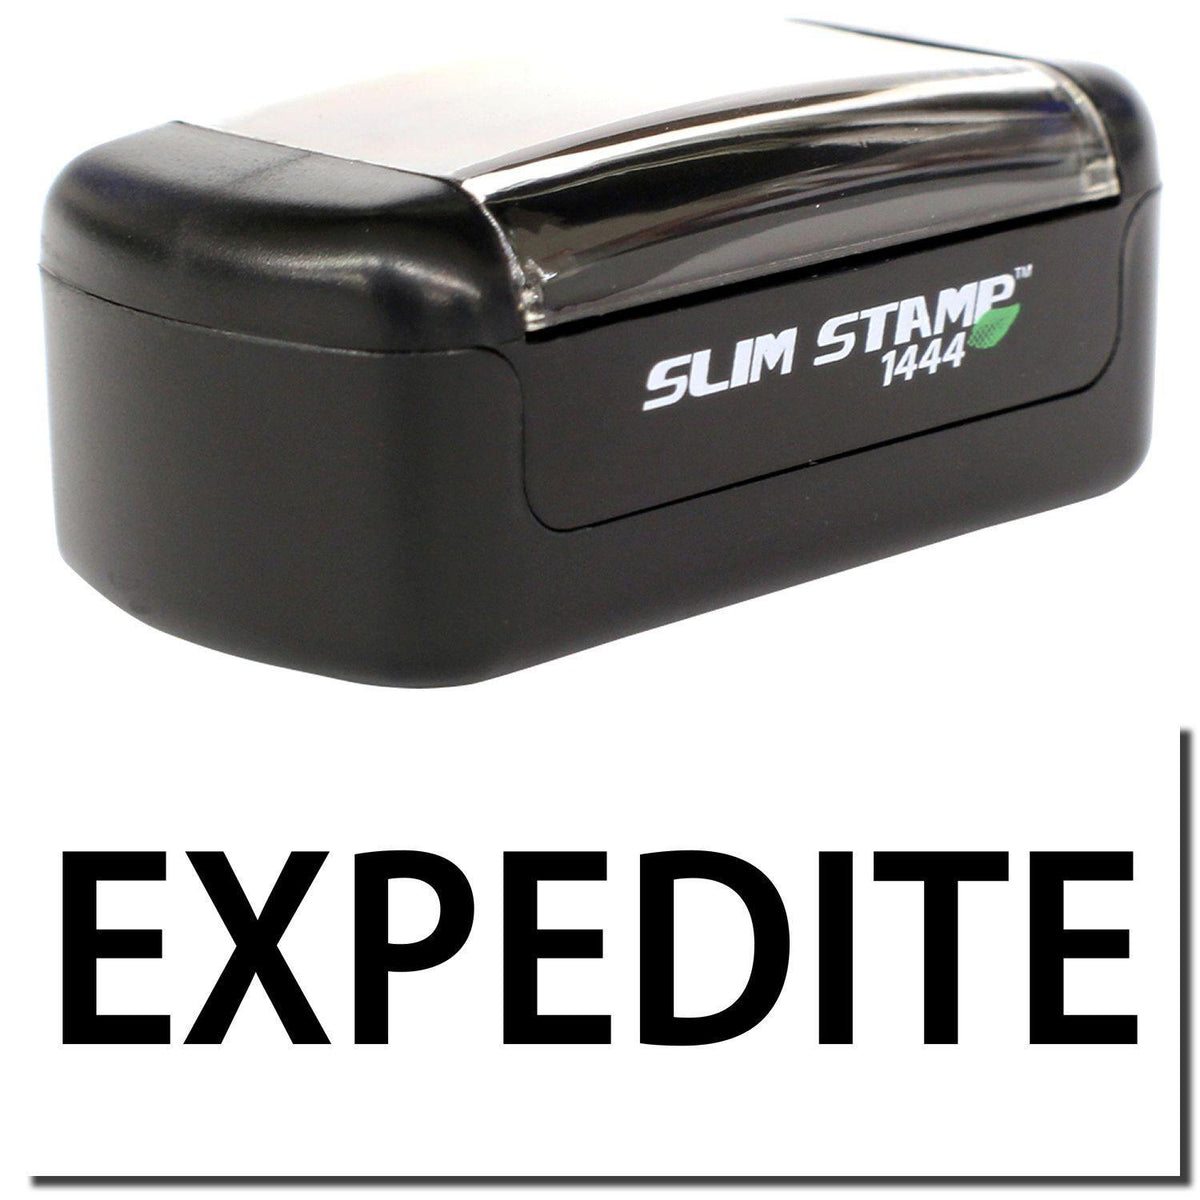 A stock office pre-inked stamp with a stamped image showing how the text &quot;EXPEDITE&quot; is displayed after stamping.